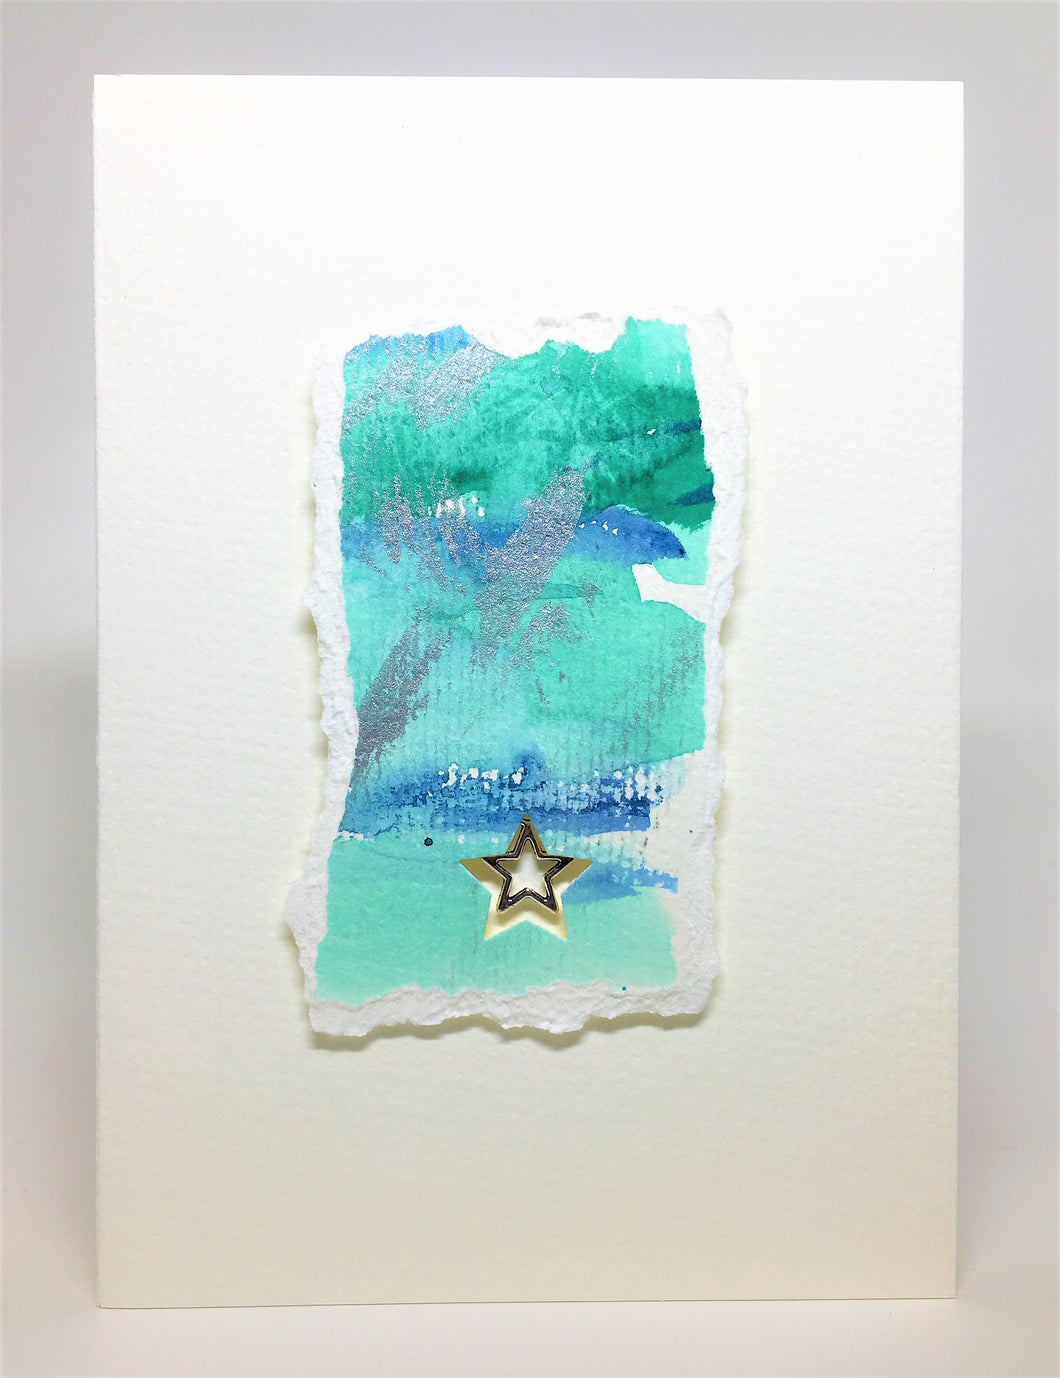 Original Handcrafted Christmas Card - Star Collection - Green, Jade, Blue, White and Silver Abstract with Star - eDgE dEsiGn London